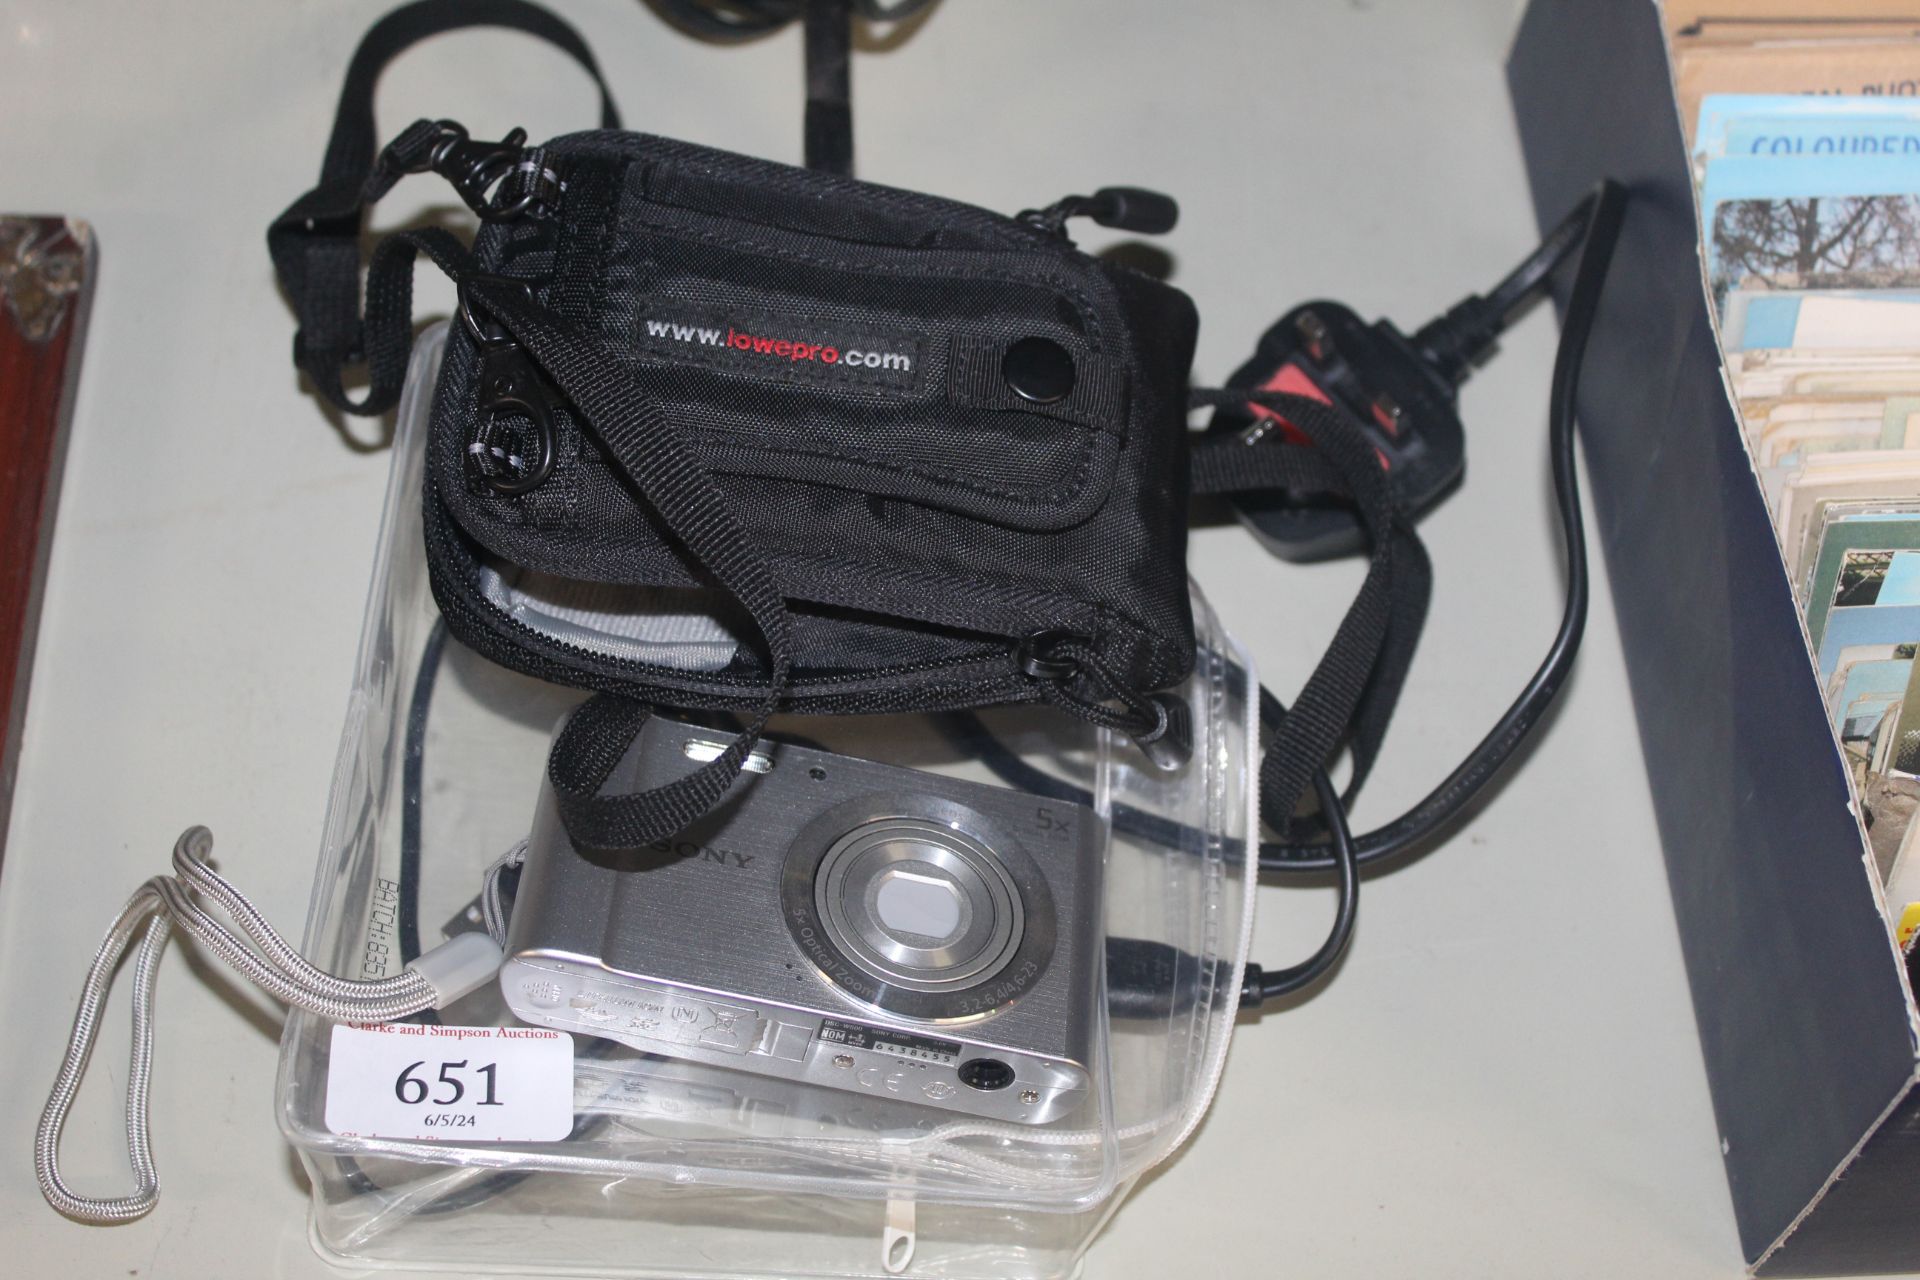 A Sony Cyber Shot digital camera with carrying cas